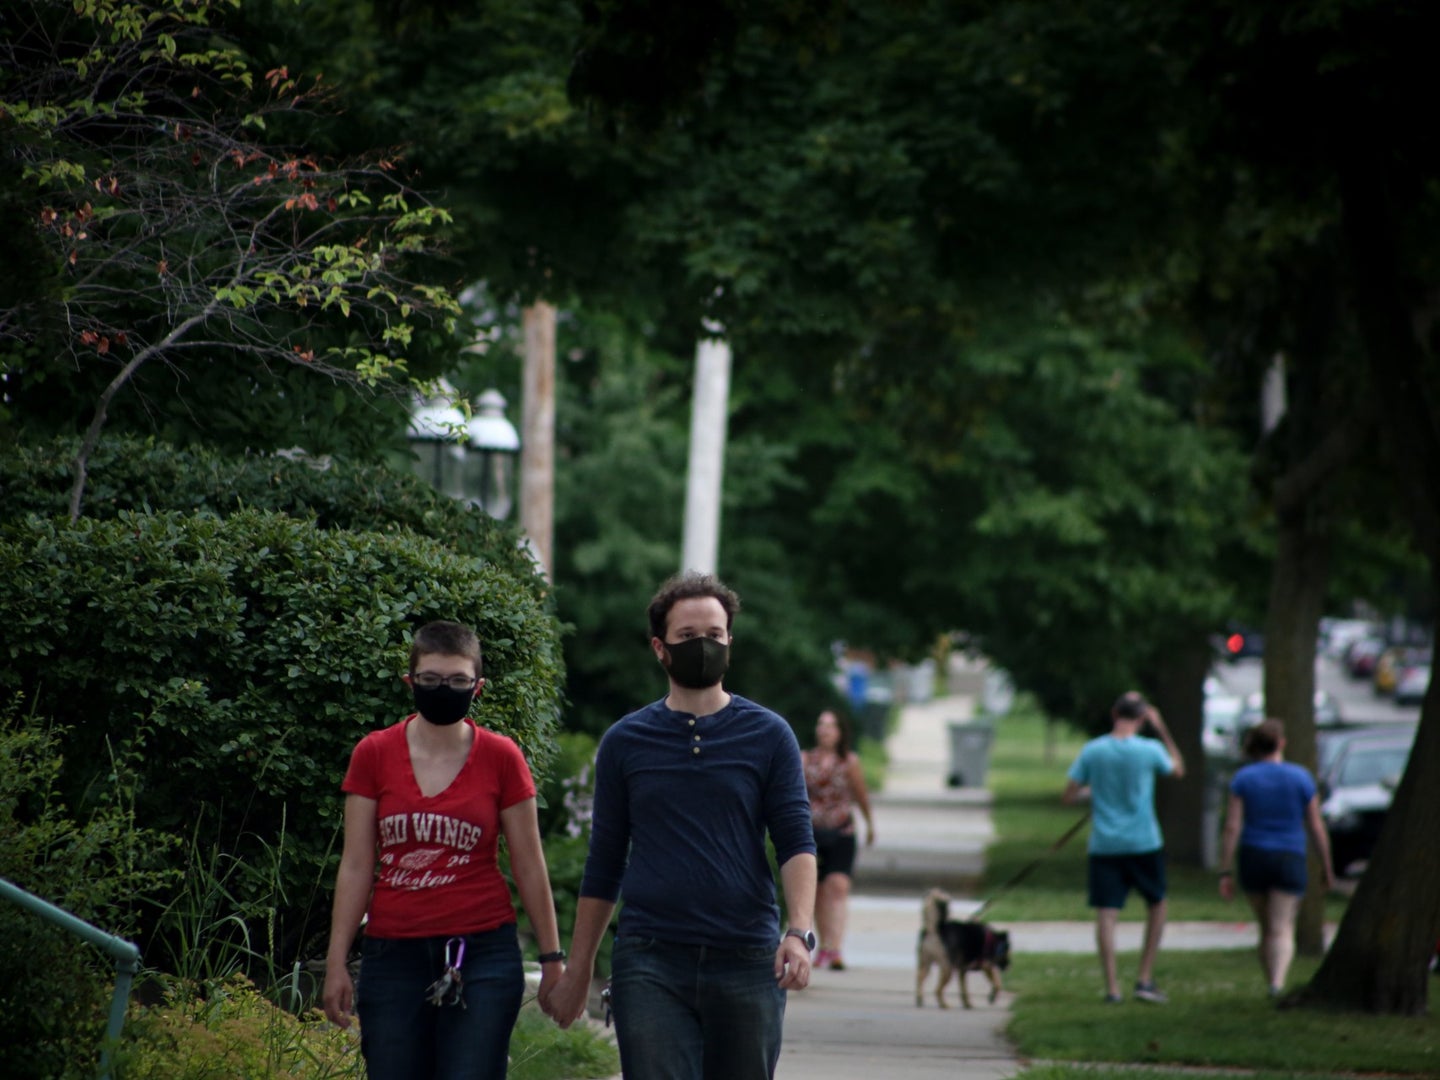 people walking around with masks in the suburbs